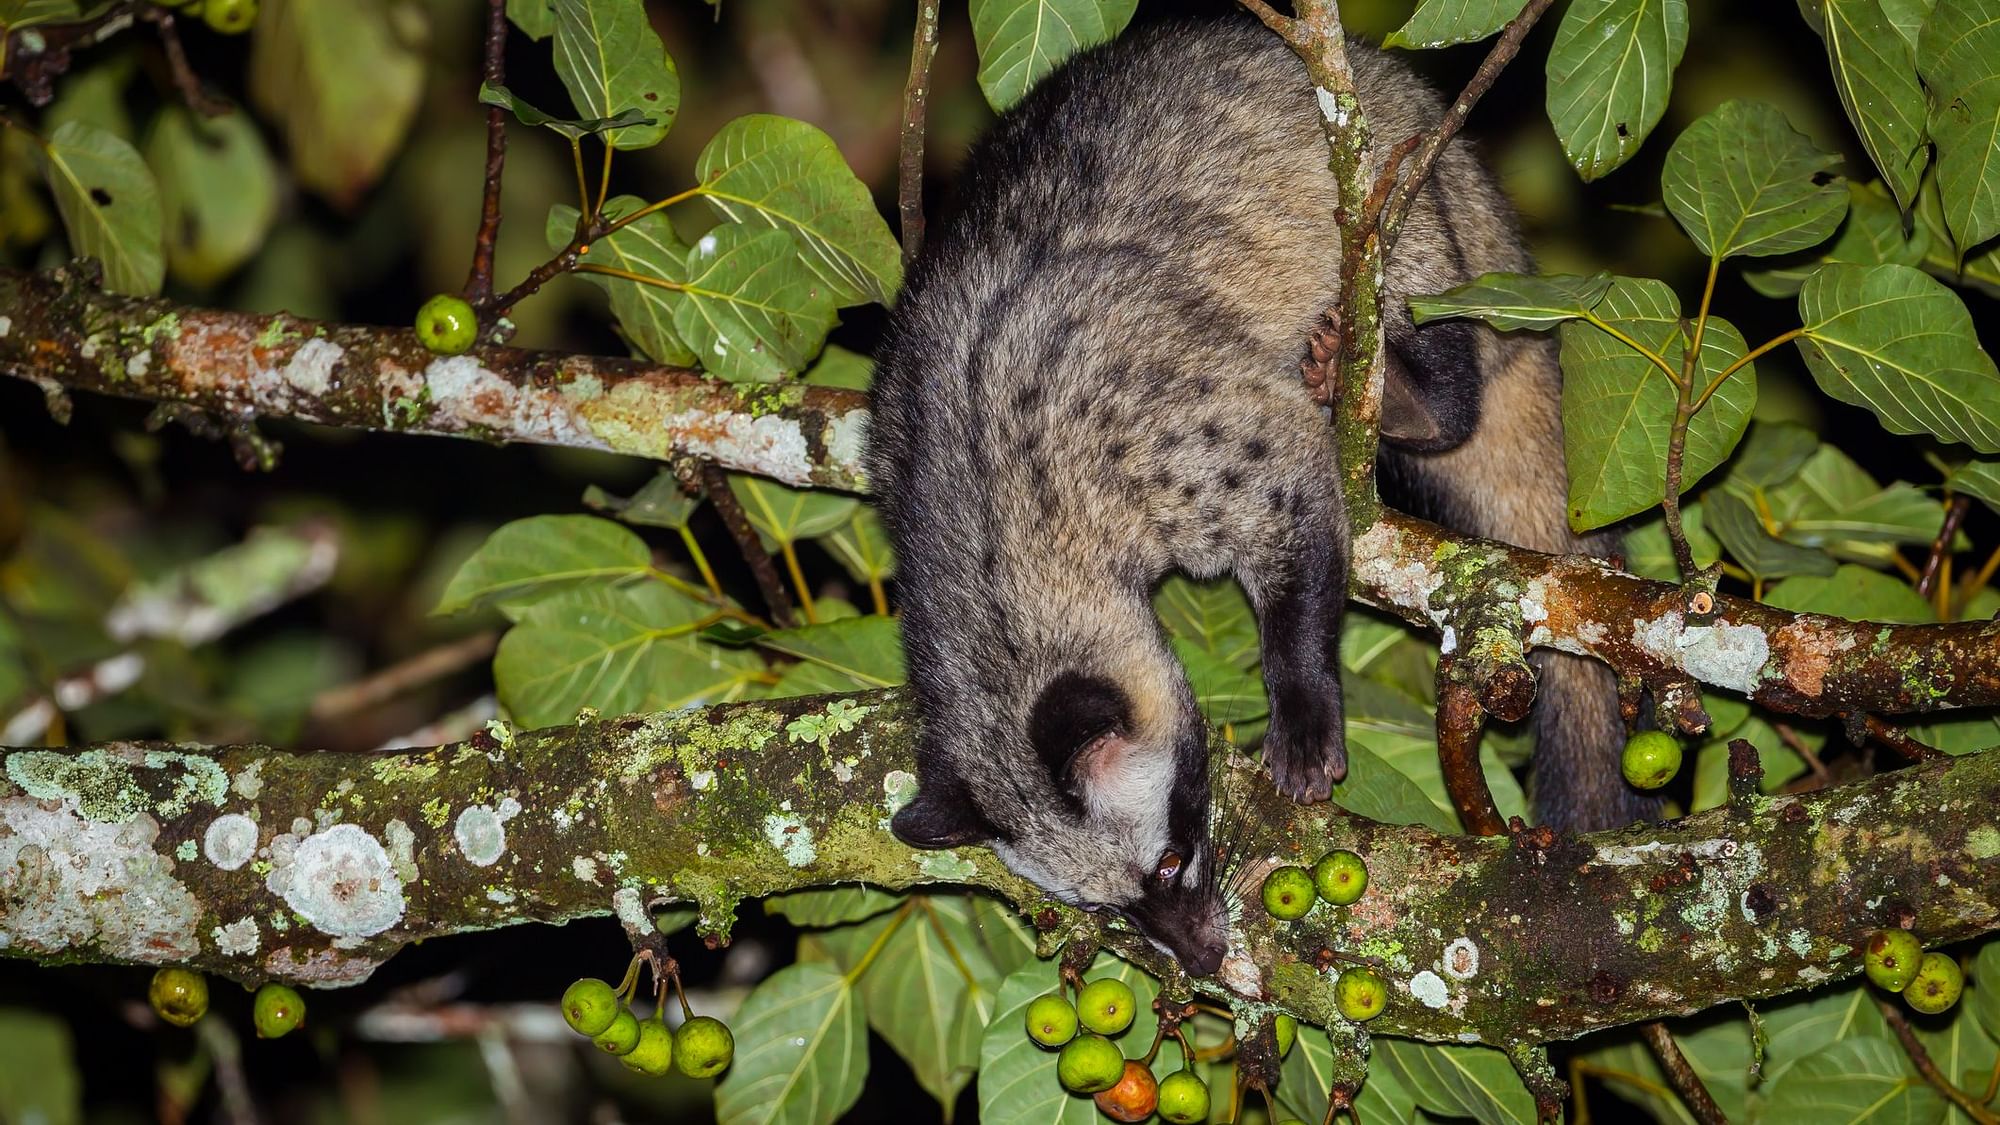 Consuming Civet coffee everyday has a lot of health benefits